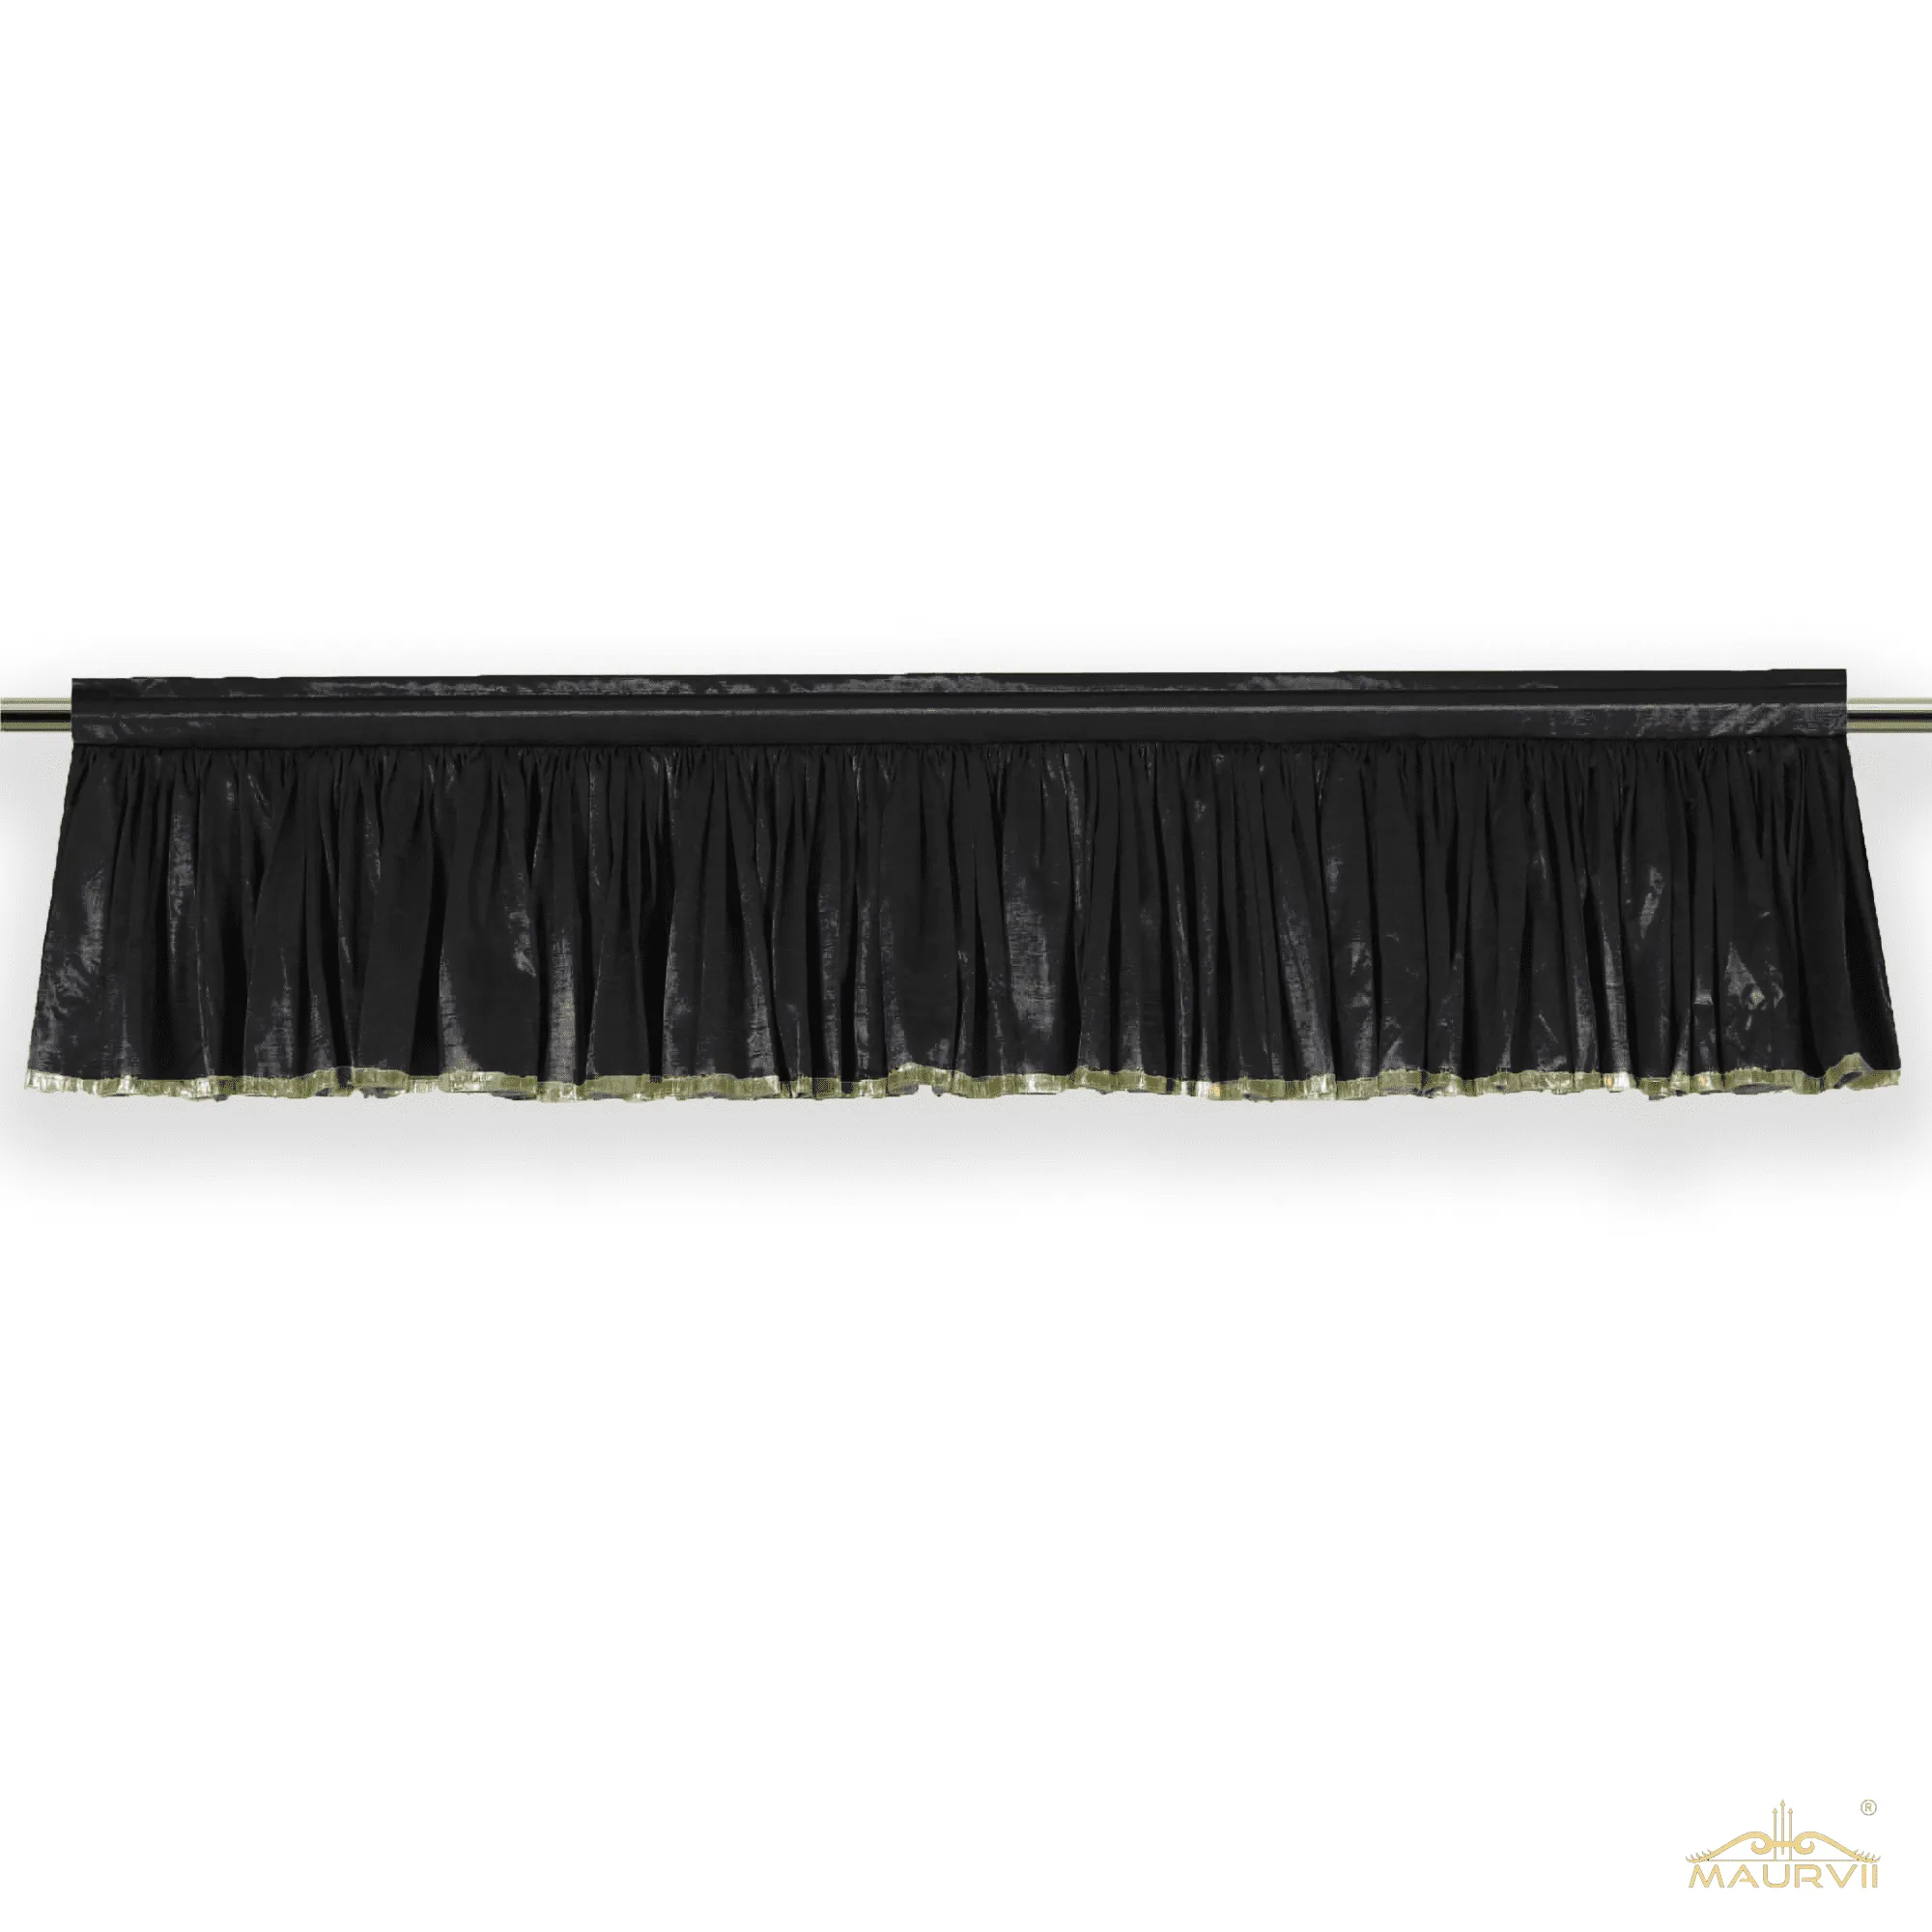 Black Pleated Valance installed with curtain rod